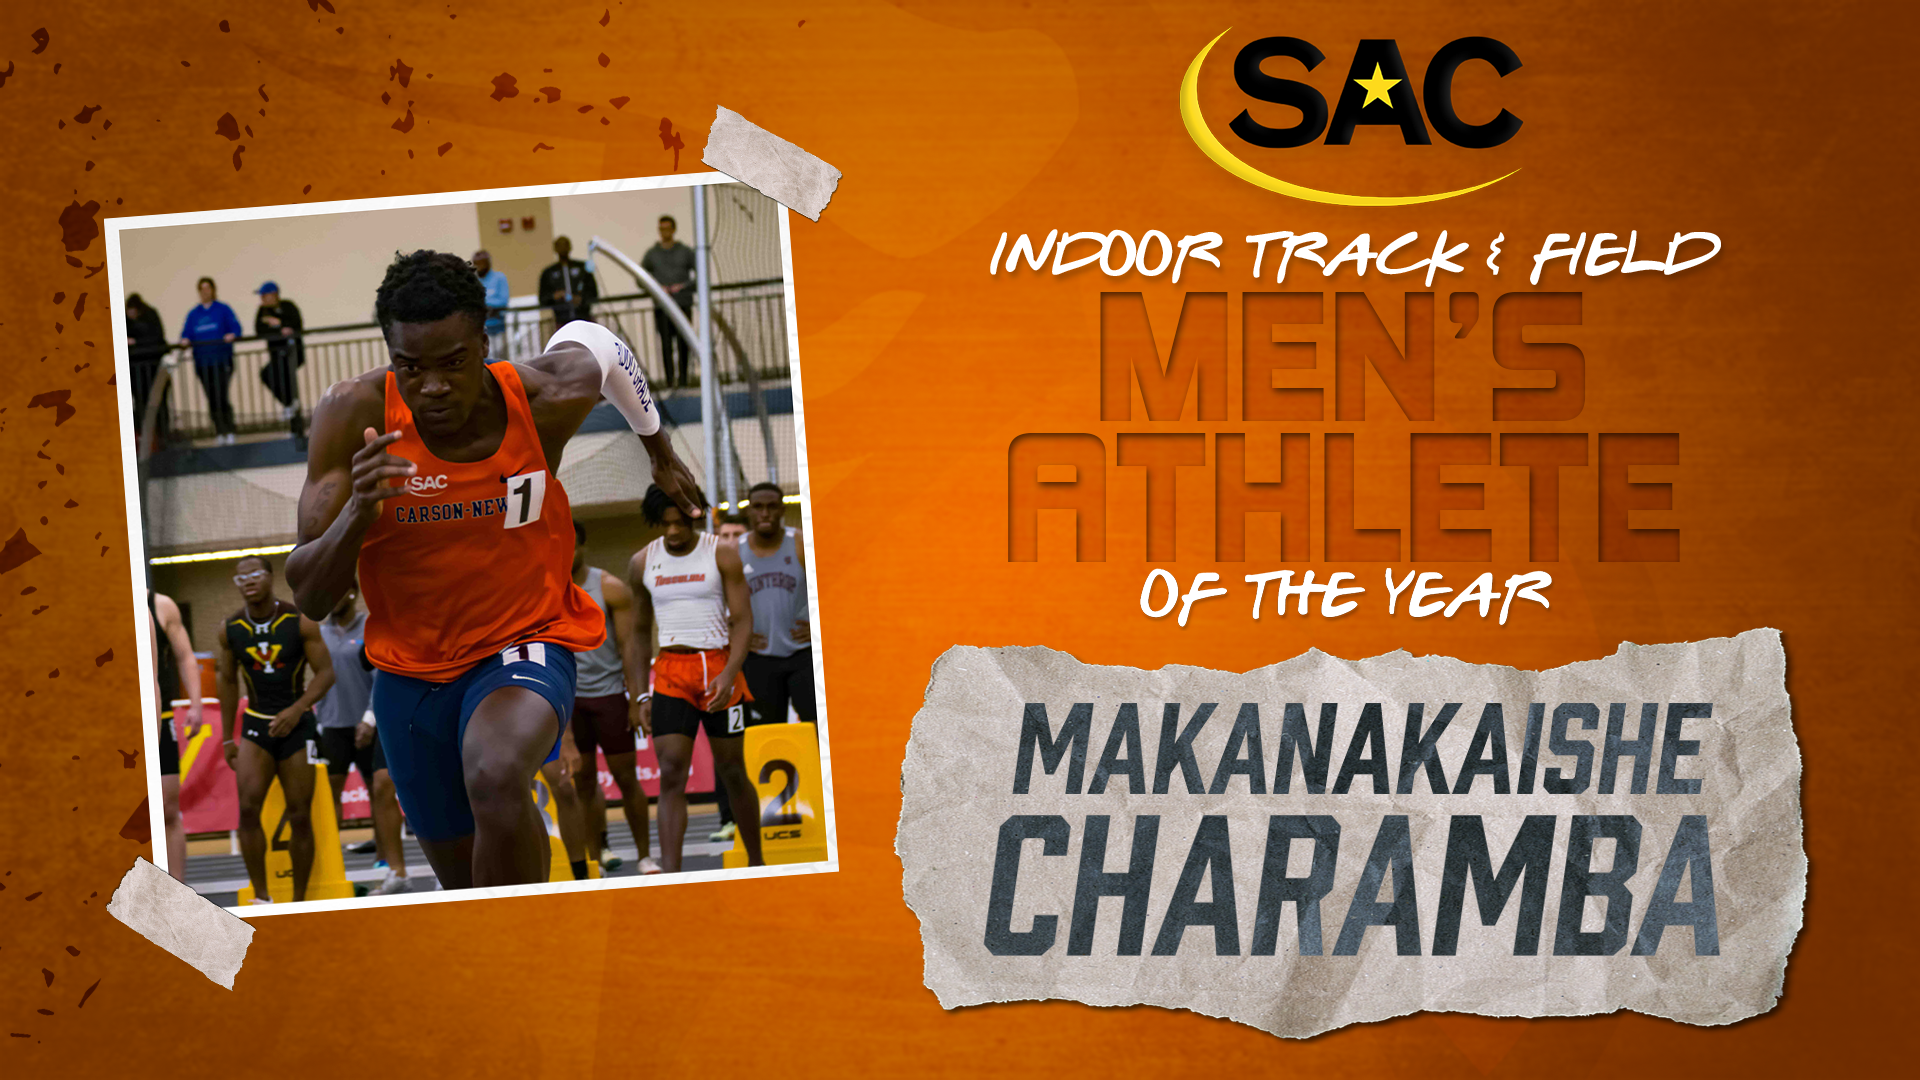 Charamba named SAC Men's Indoor Track and Field Athlete of the Year